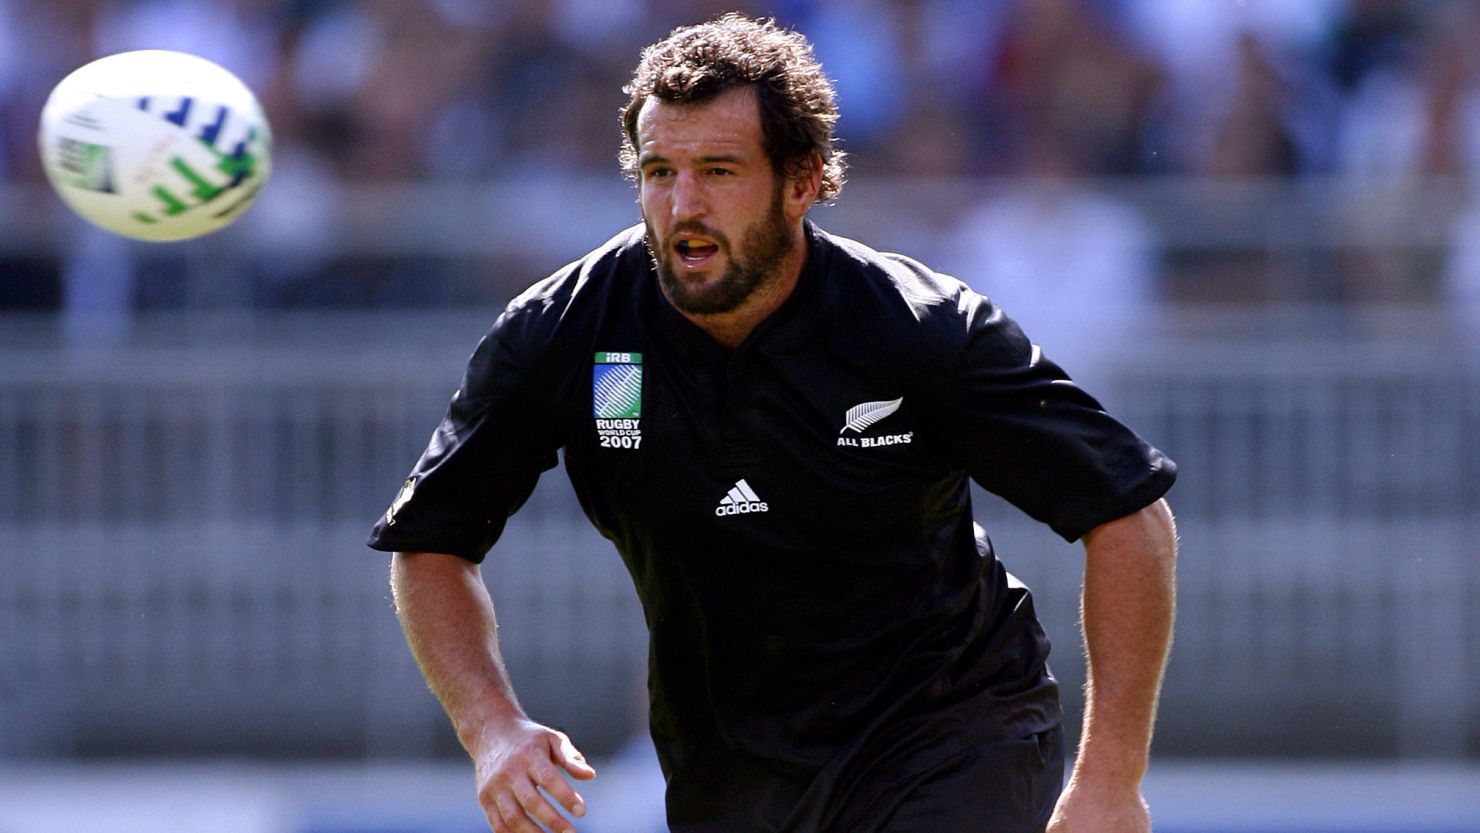 Former All Black Carl Hayman has been diagnosed with early onset dementia.